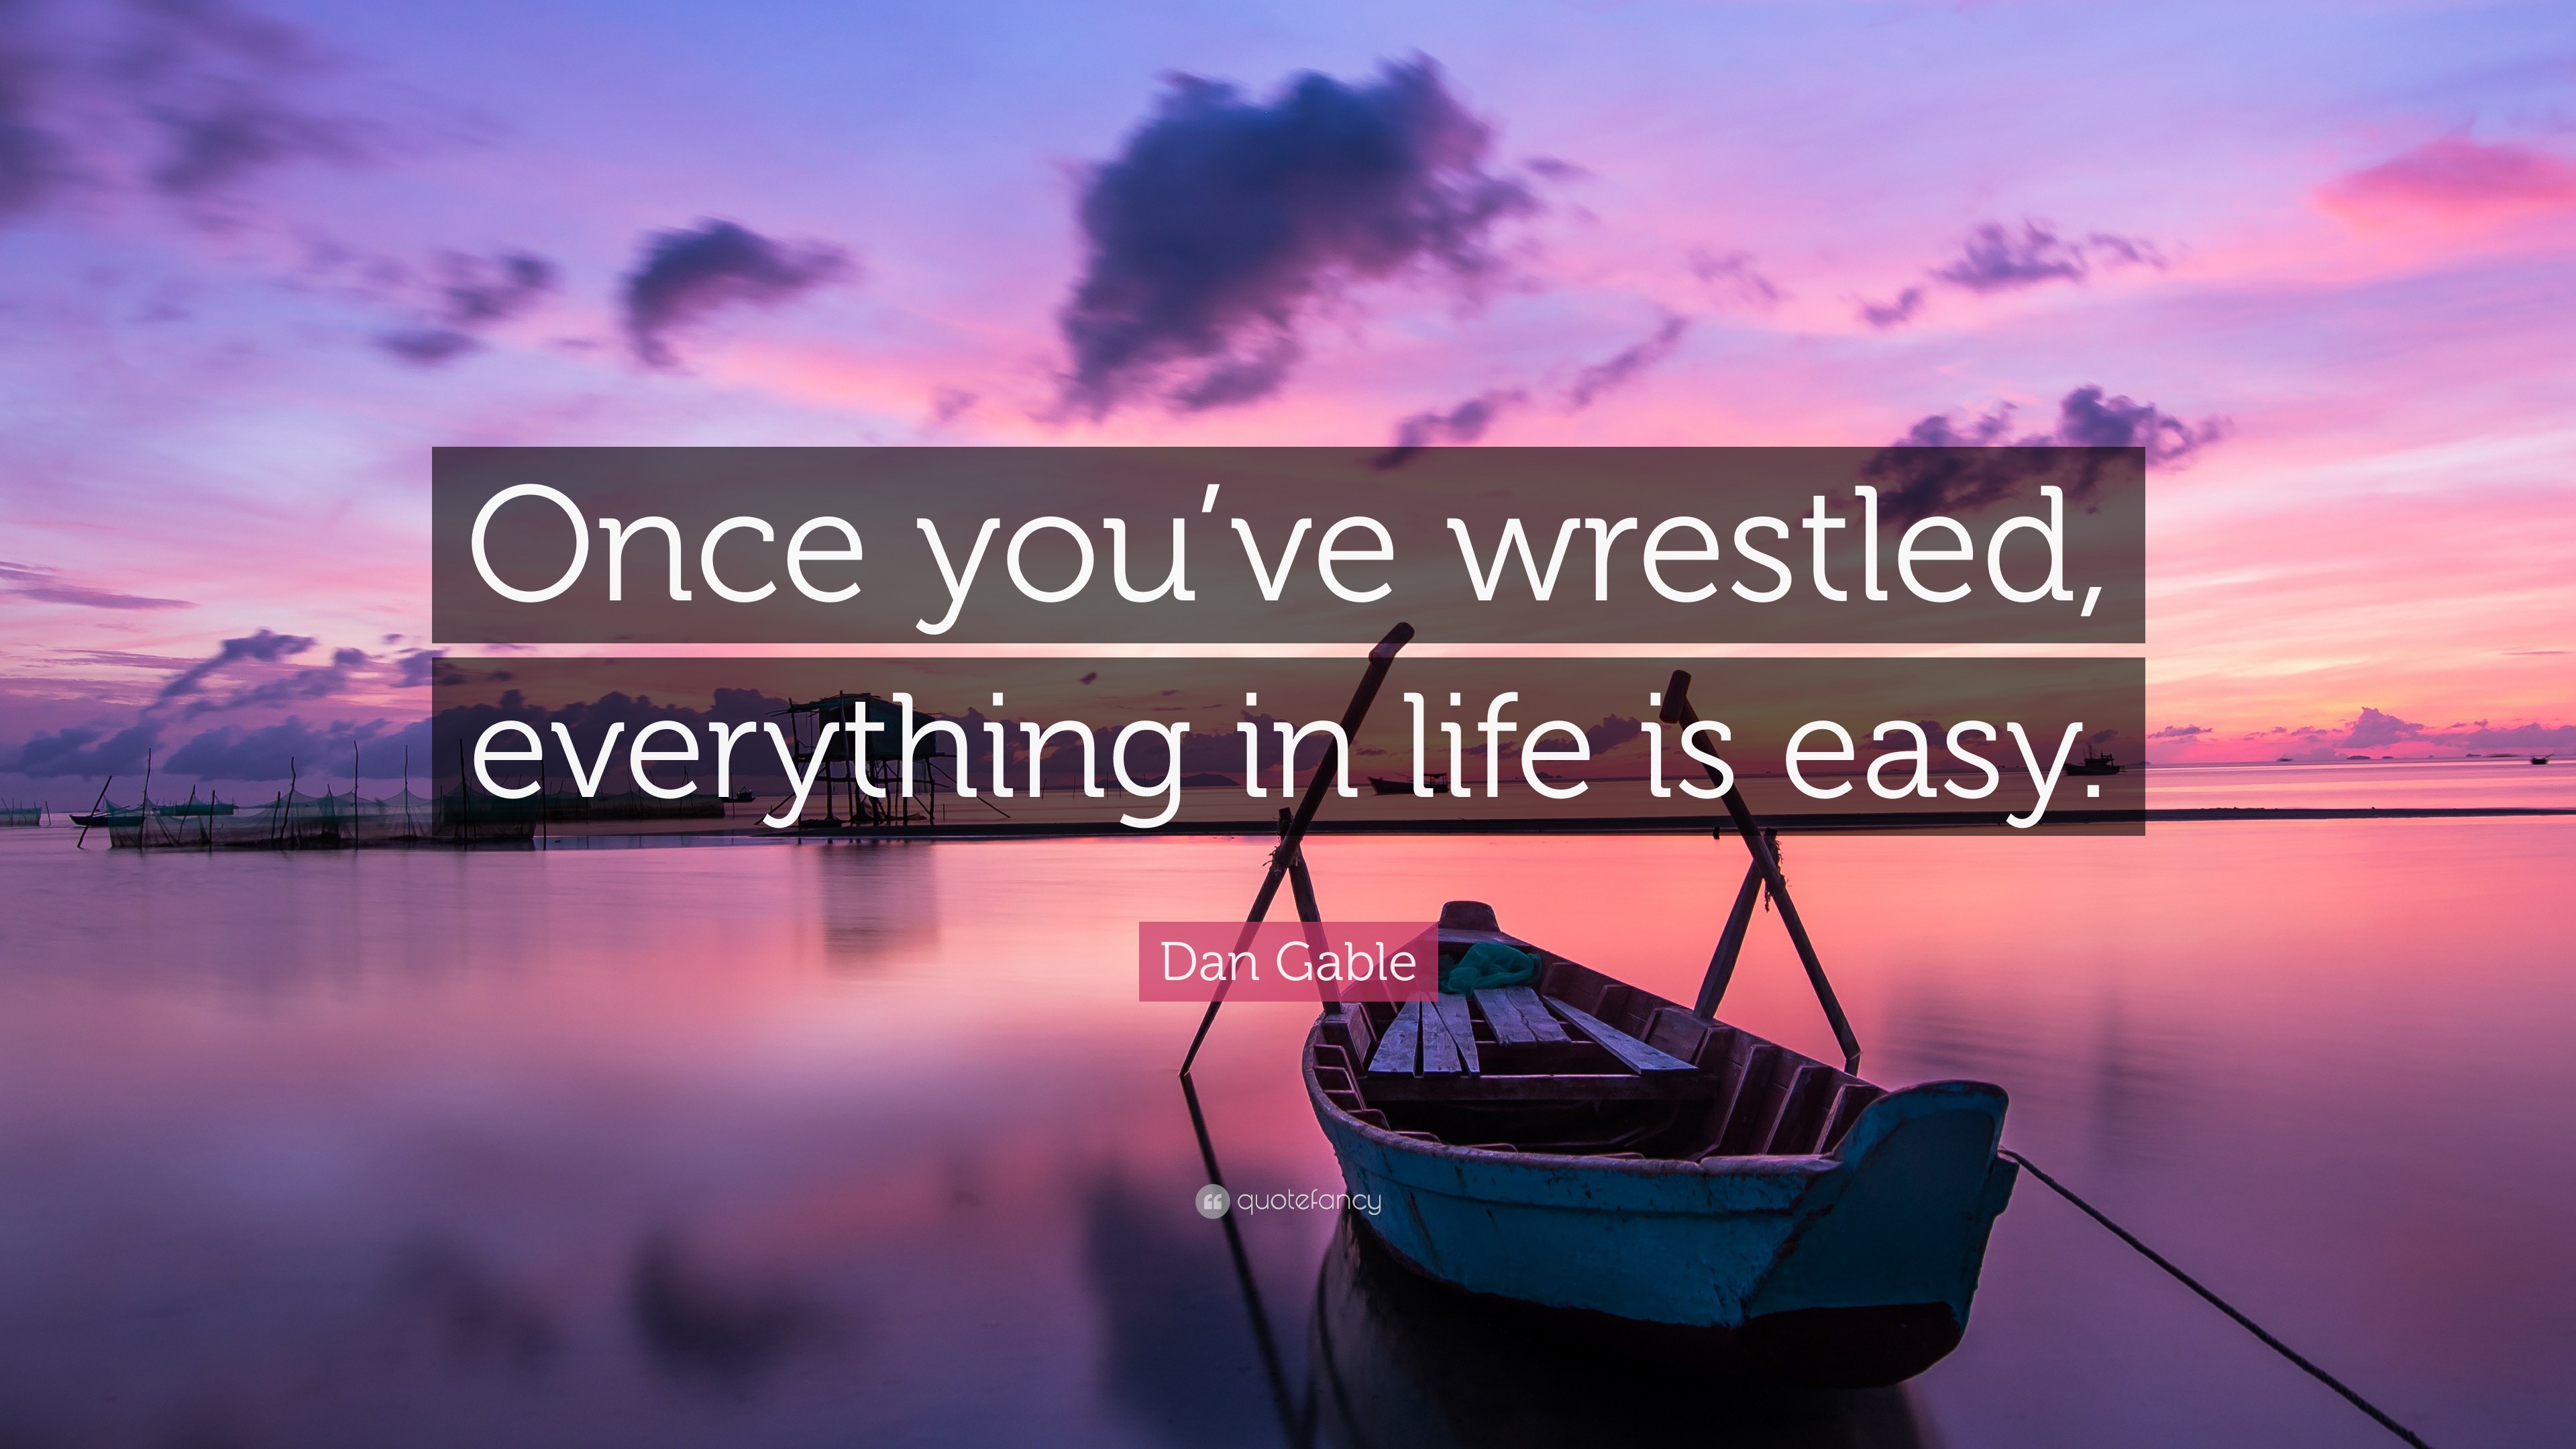 Dan Gable Quote: "Once you've wrestled, everything in life ...